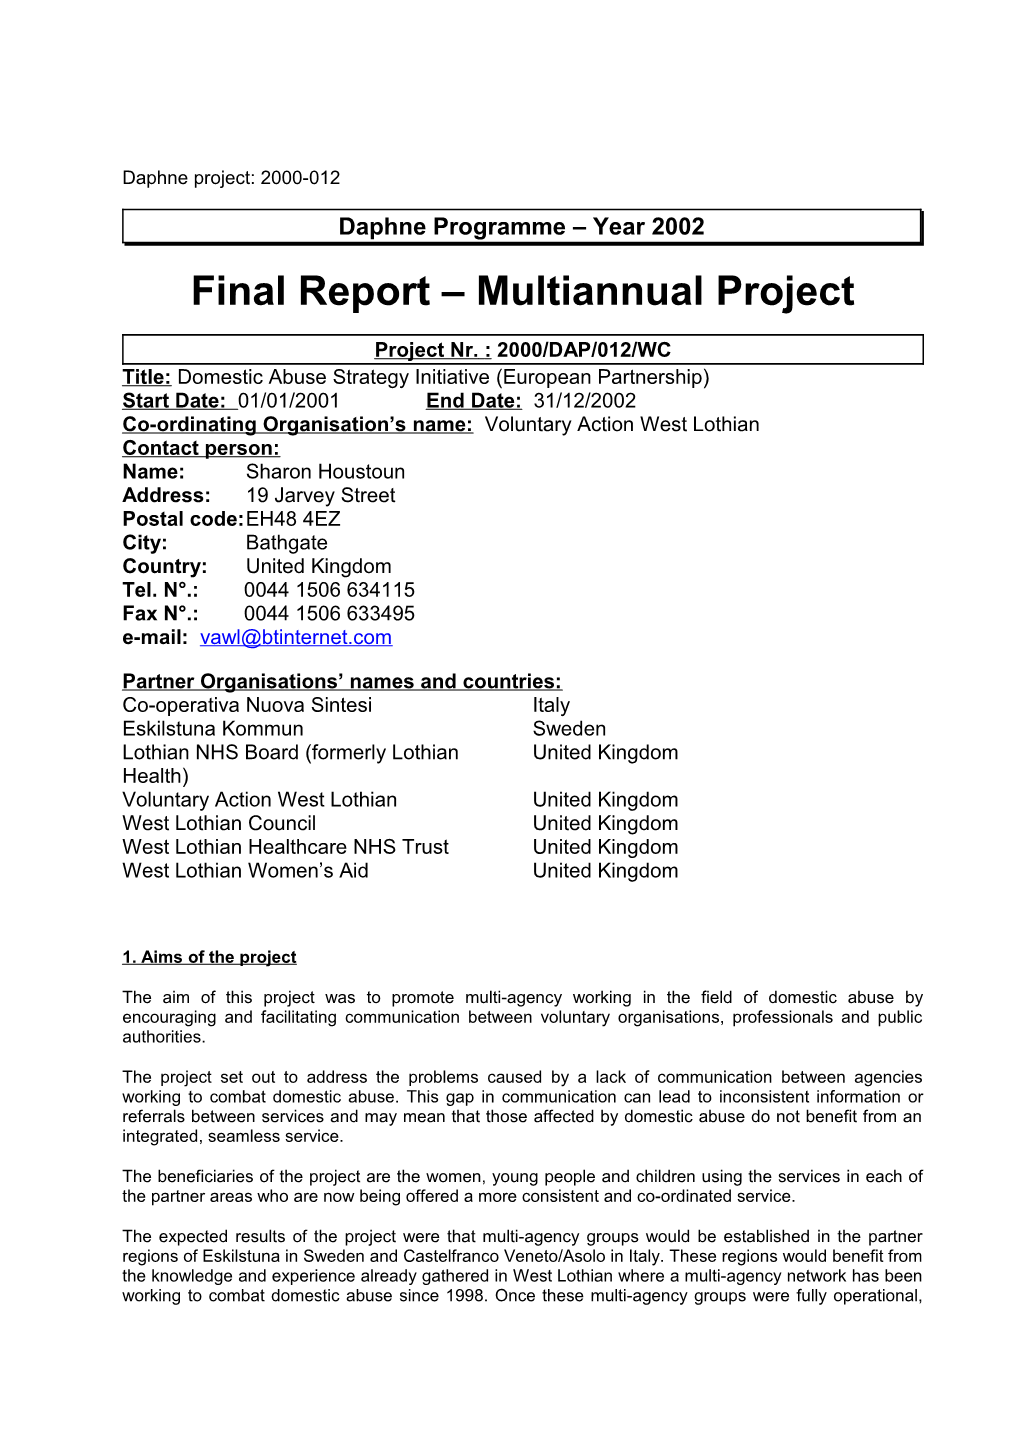 Final Report Multiannual Project